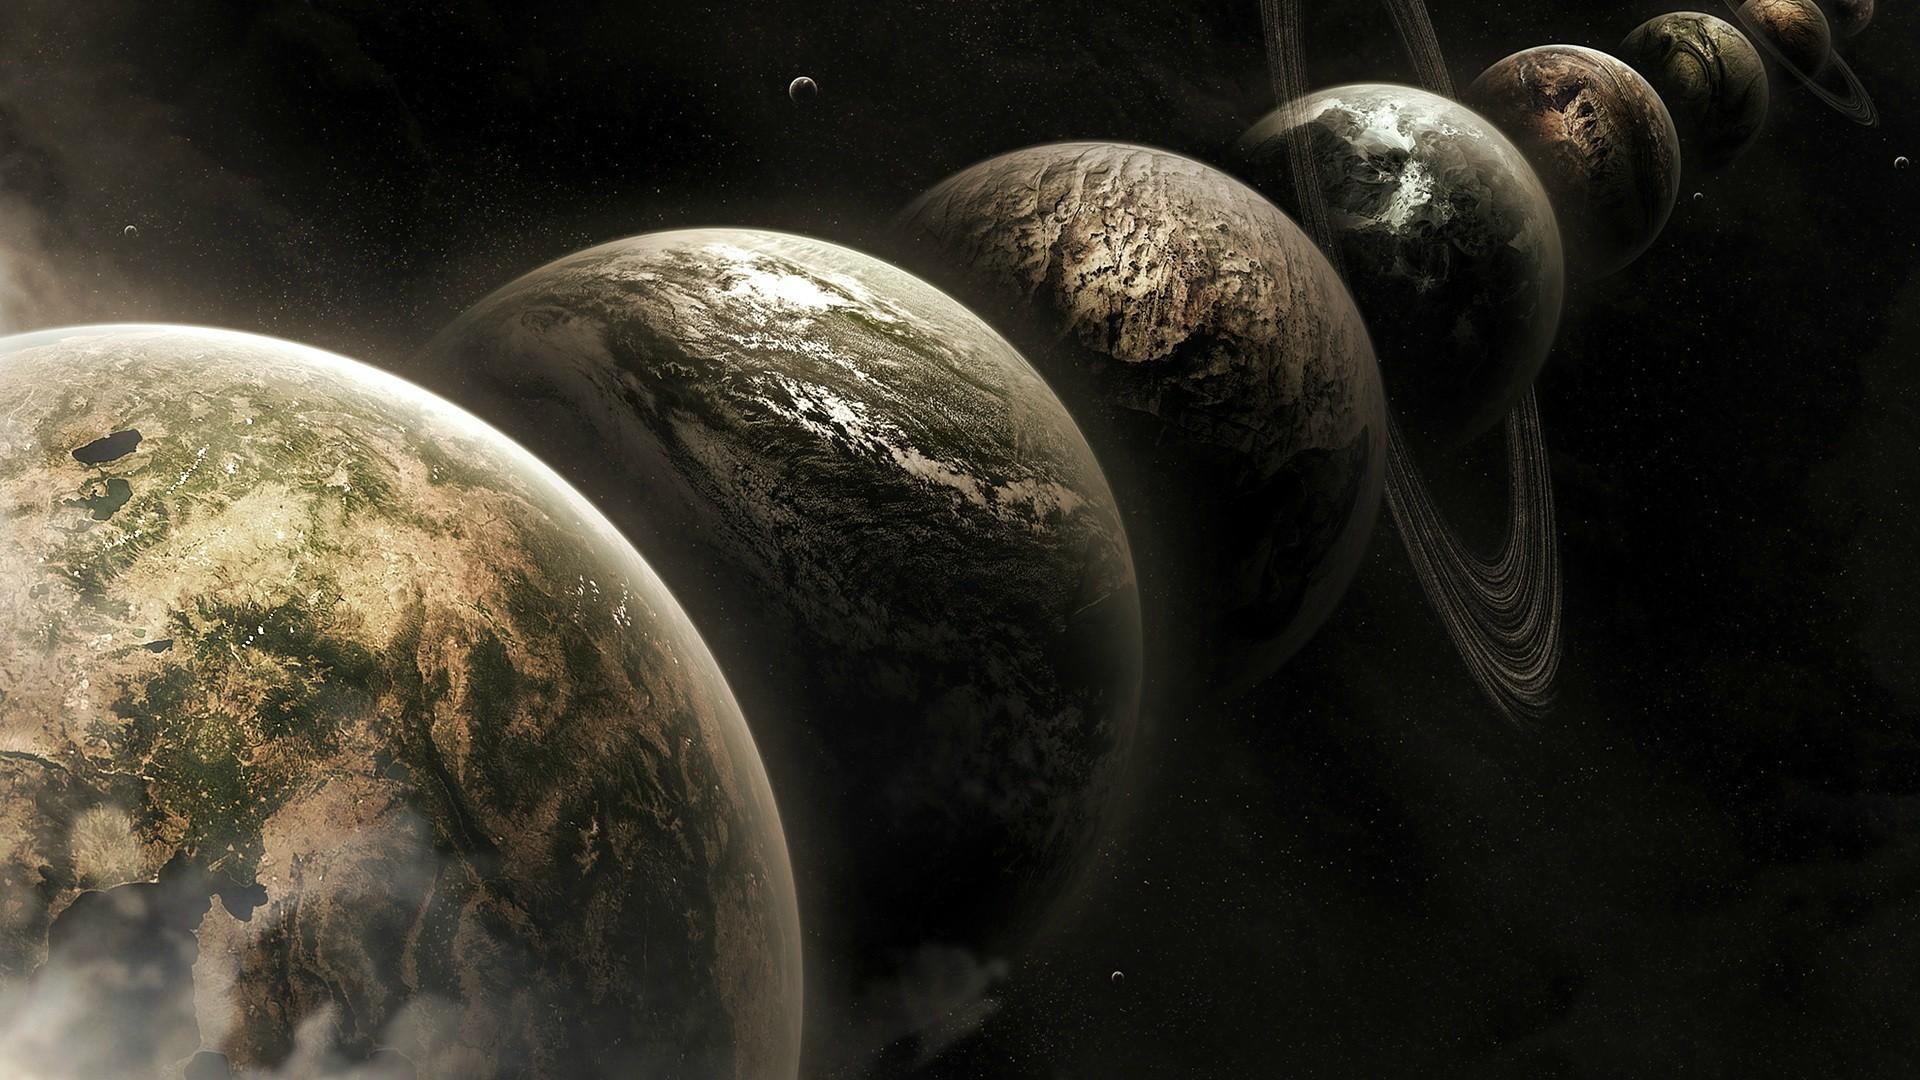 Cool planets wallpaper